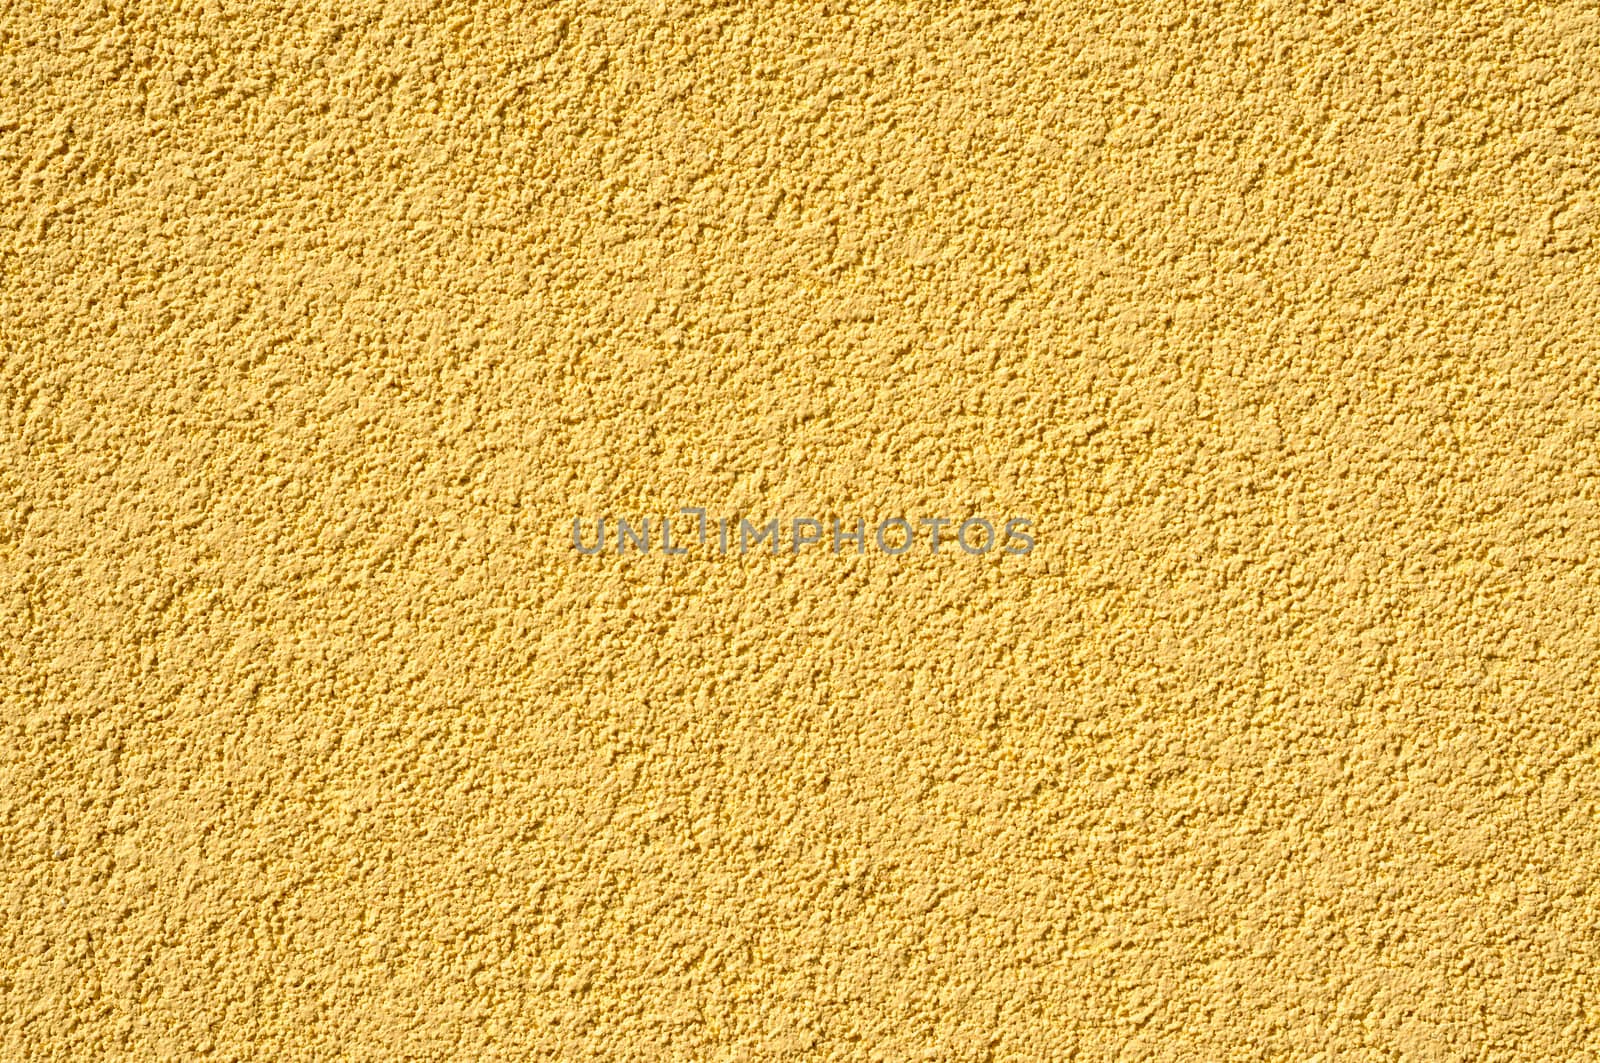 A yellow cement - stucco modern wall texture